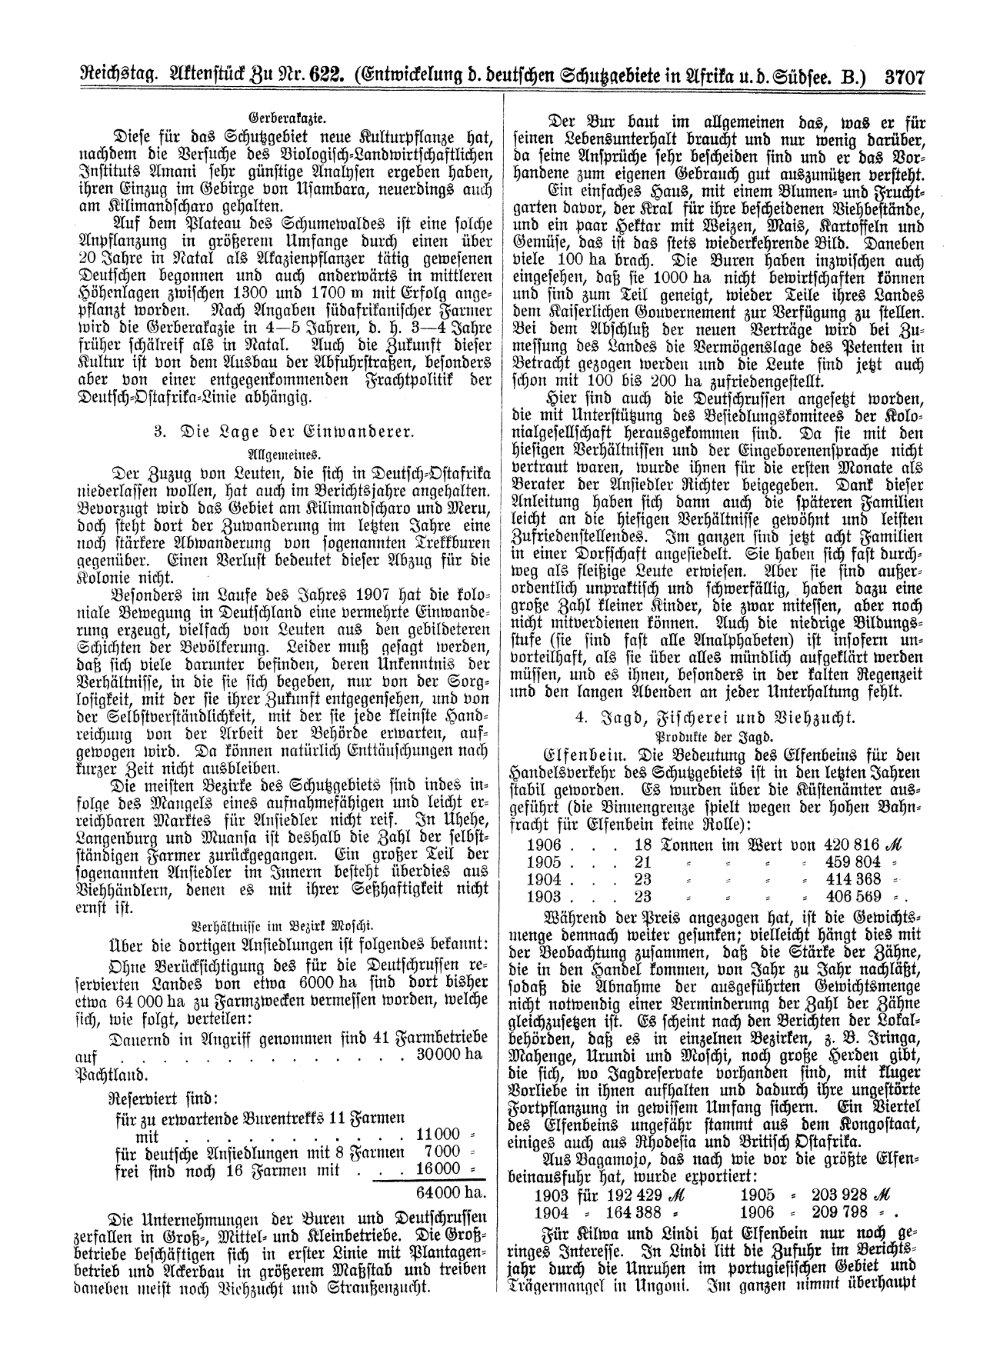 Scan of page 3707